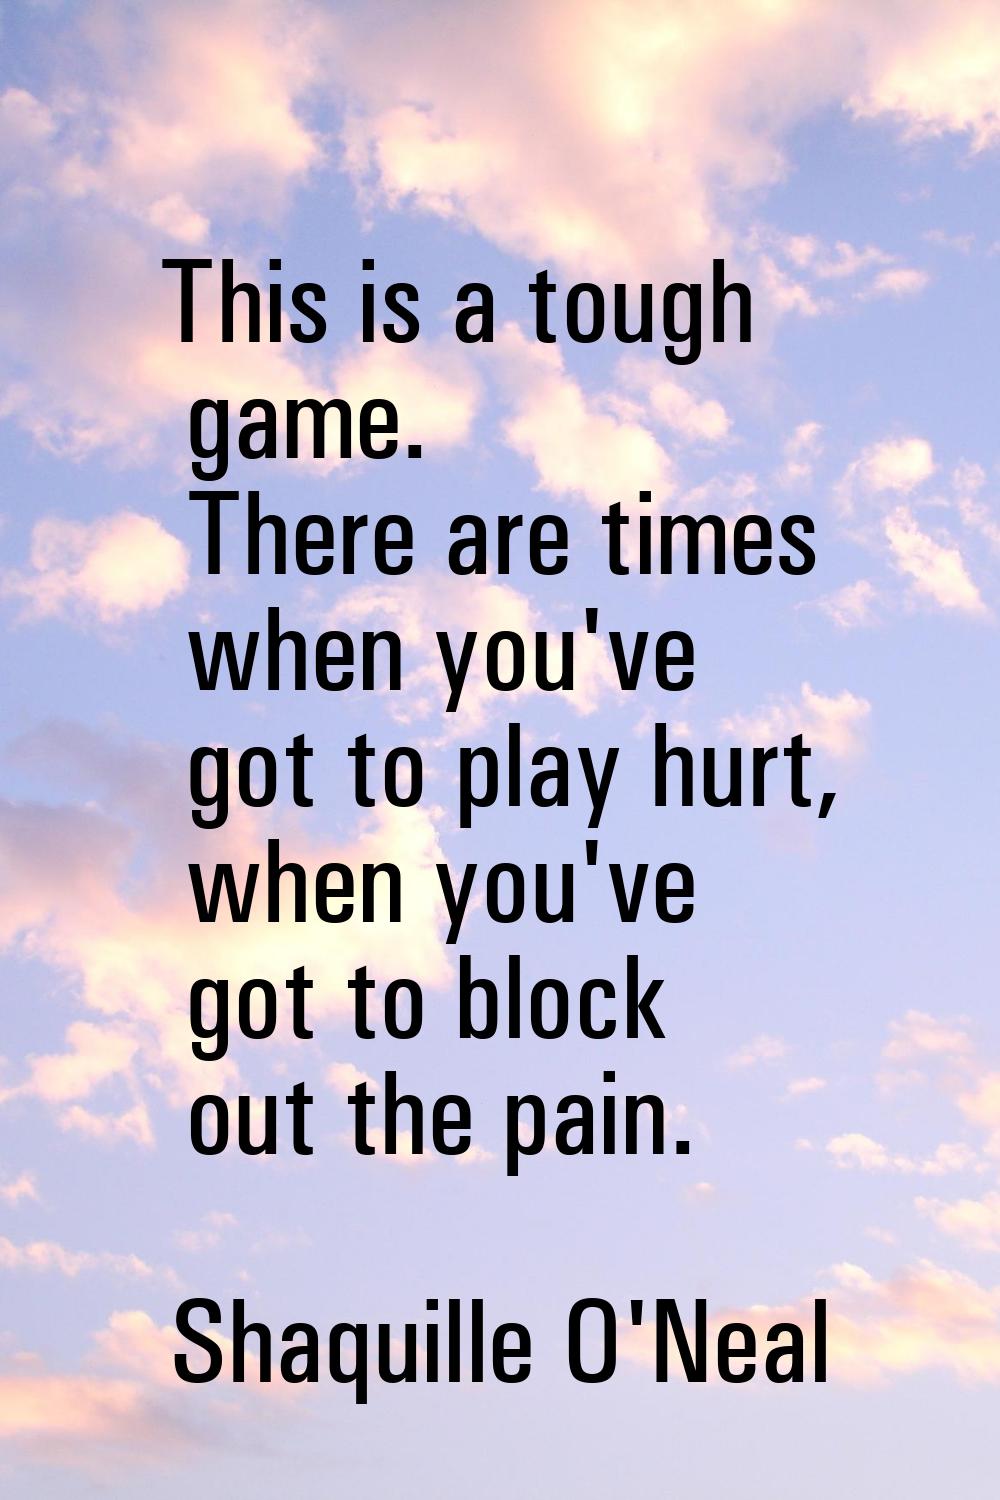 This is a tough game. There are times when you've got to play hurt, when you've got to block out th